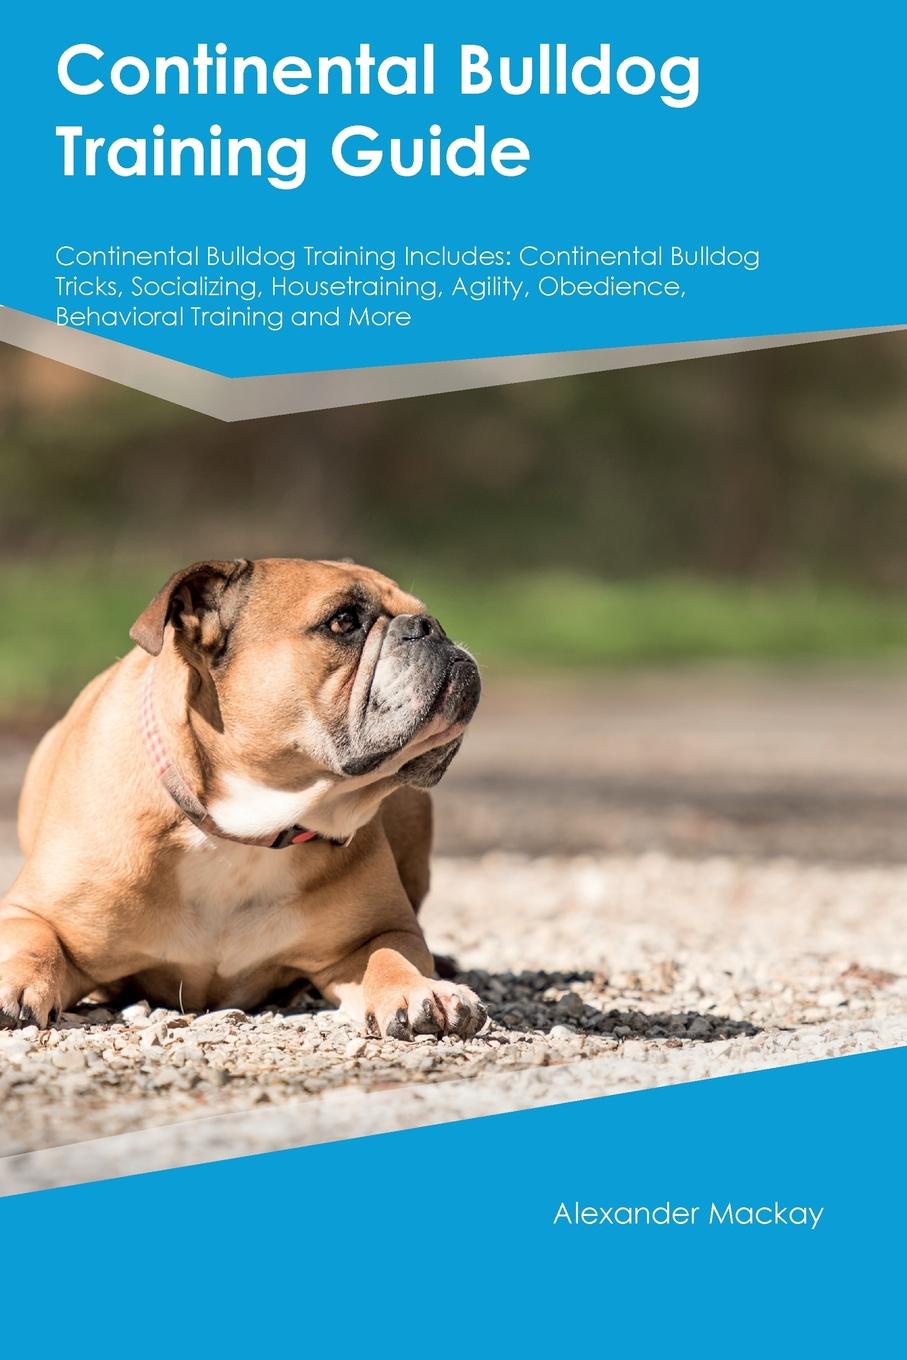 Continental Bulldog Training Guide Continental Bulldog Training Includes. Continental Bulldog Tricks, Socializing, Housetraining, Agility, Obedience, Behavioral Training and More